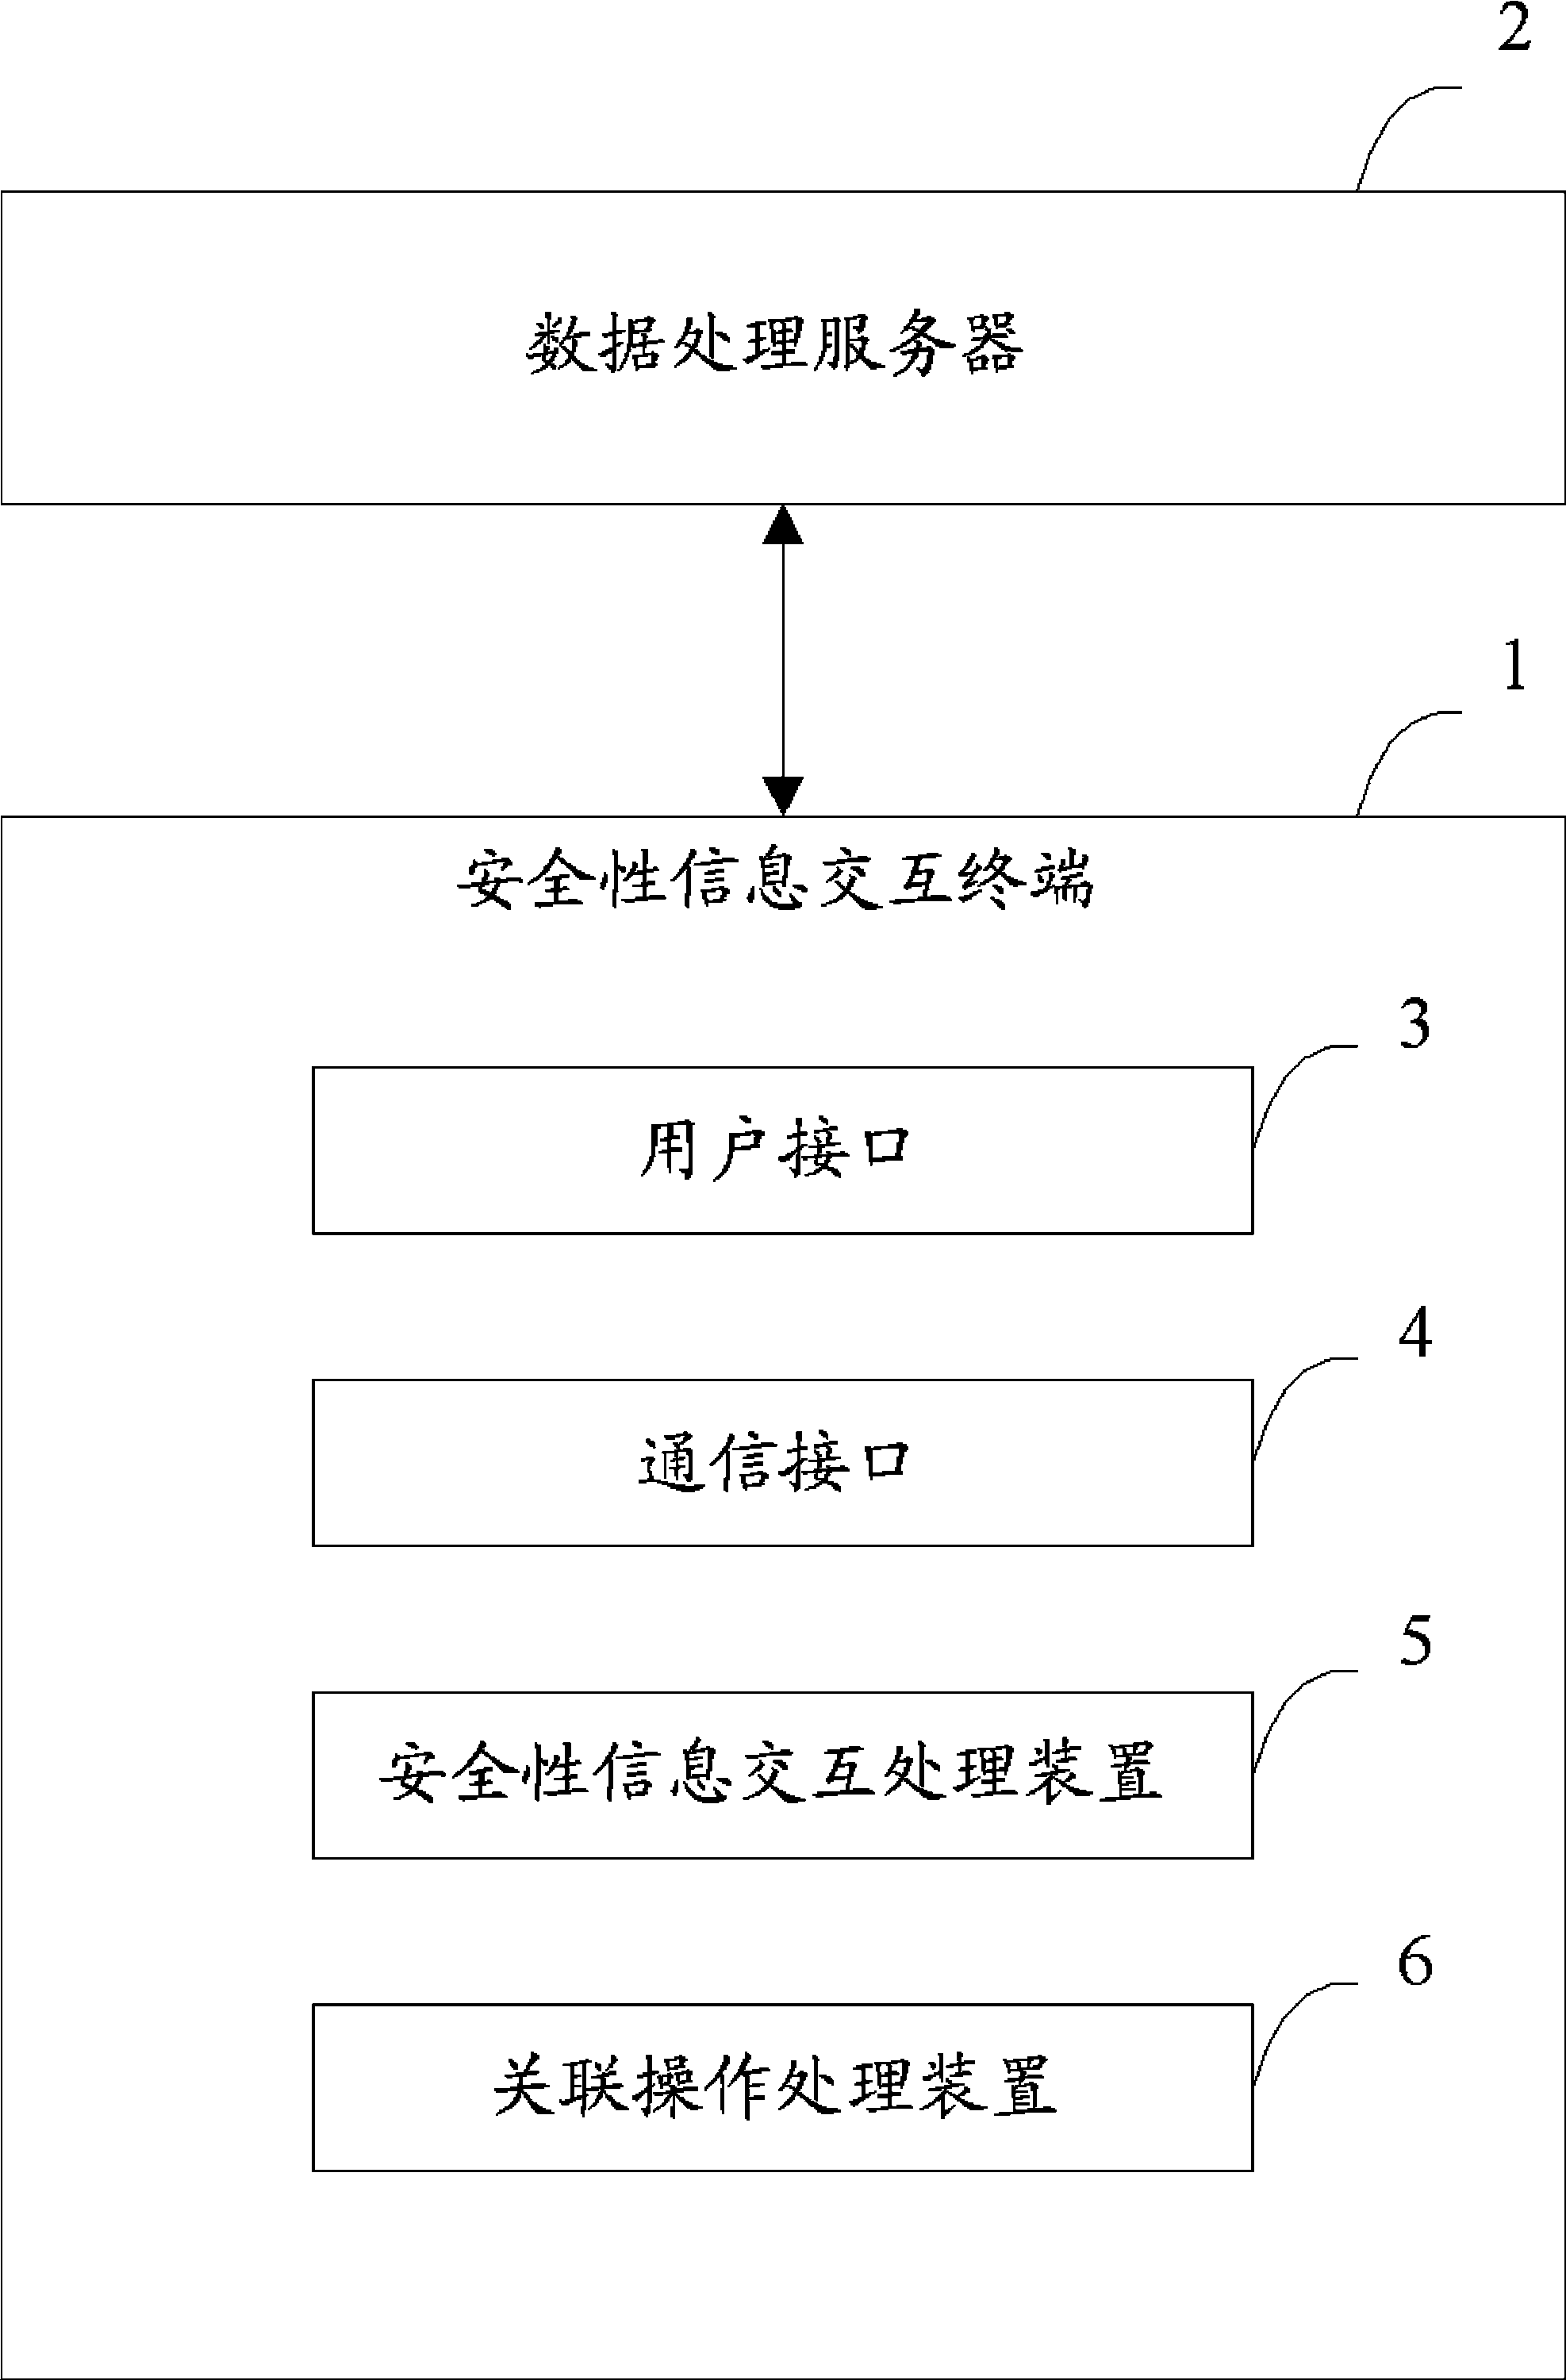 Security information interaction system, device and method